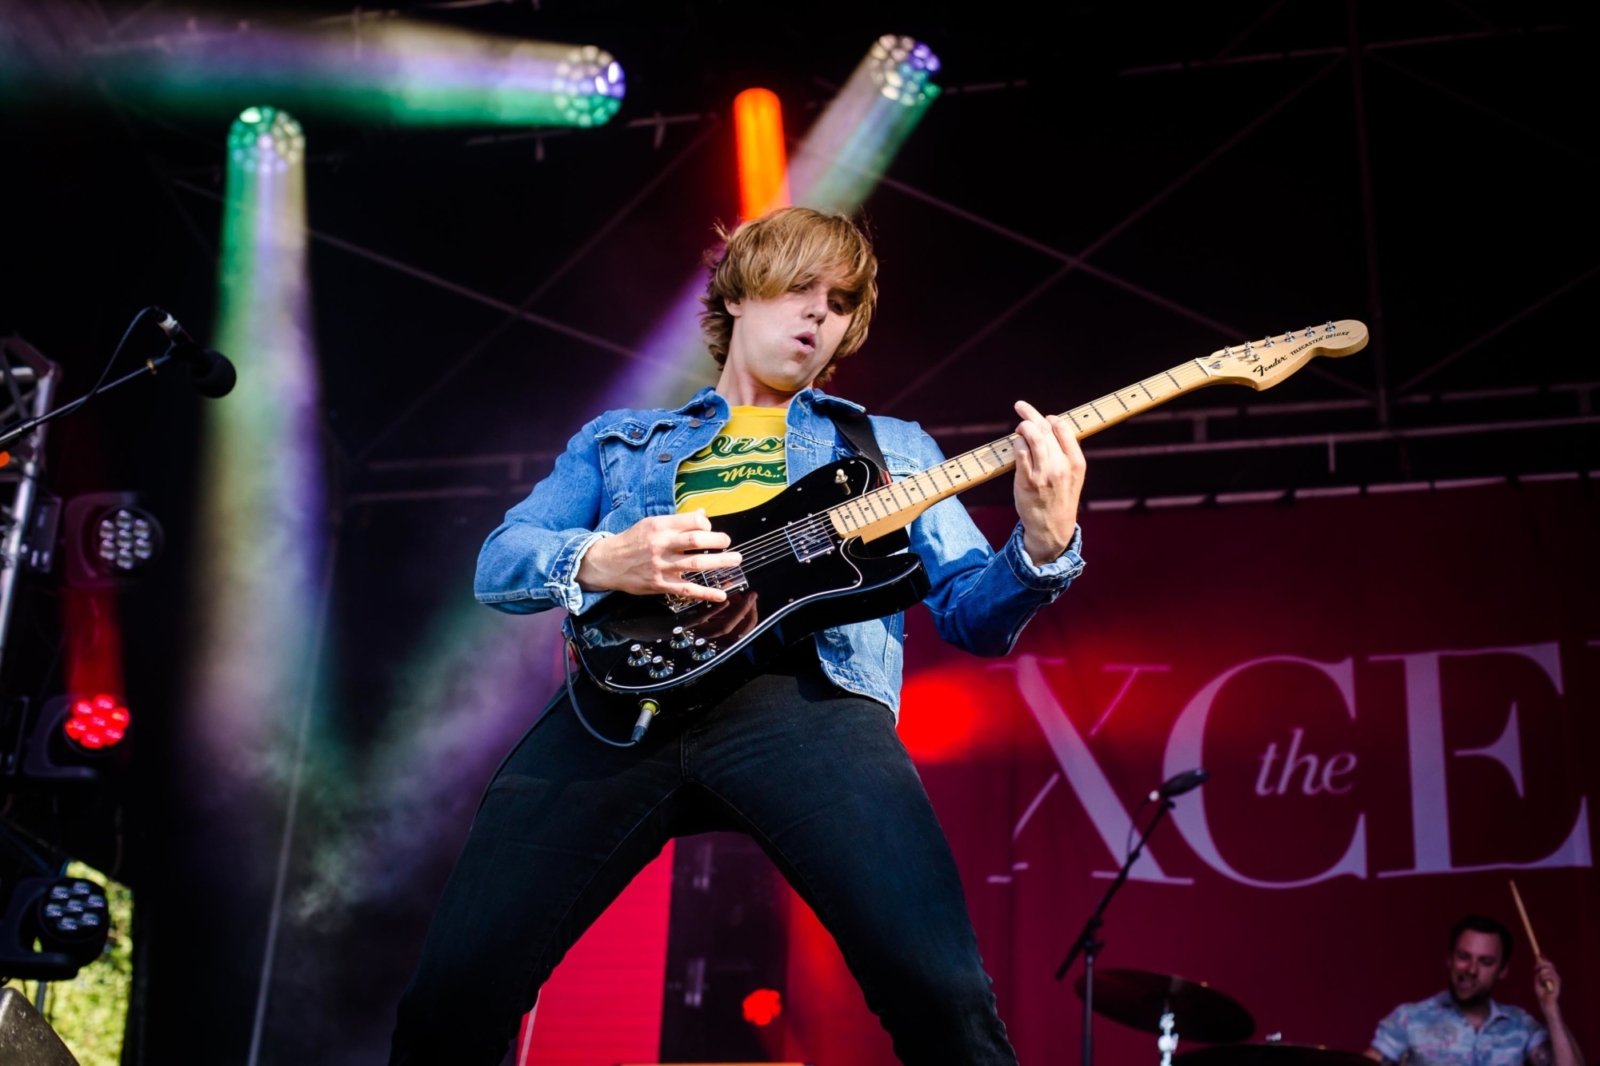 The Xcerts talk their House of Vans set: "We'll be popping our Bestival cherry"